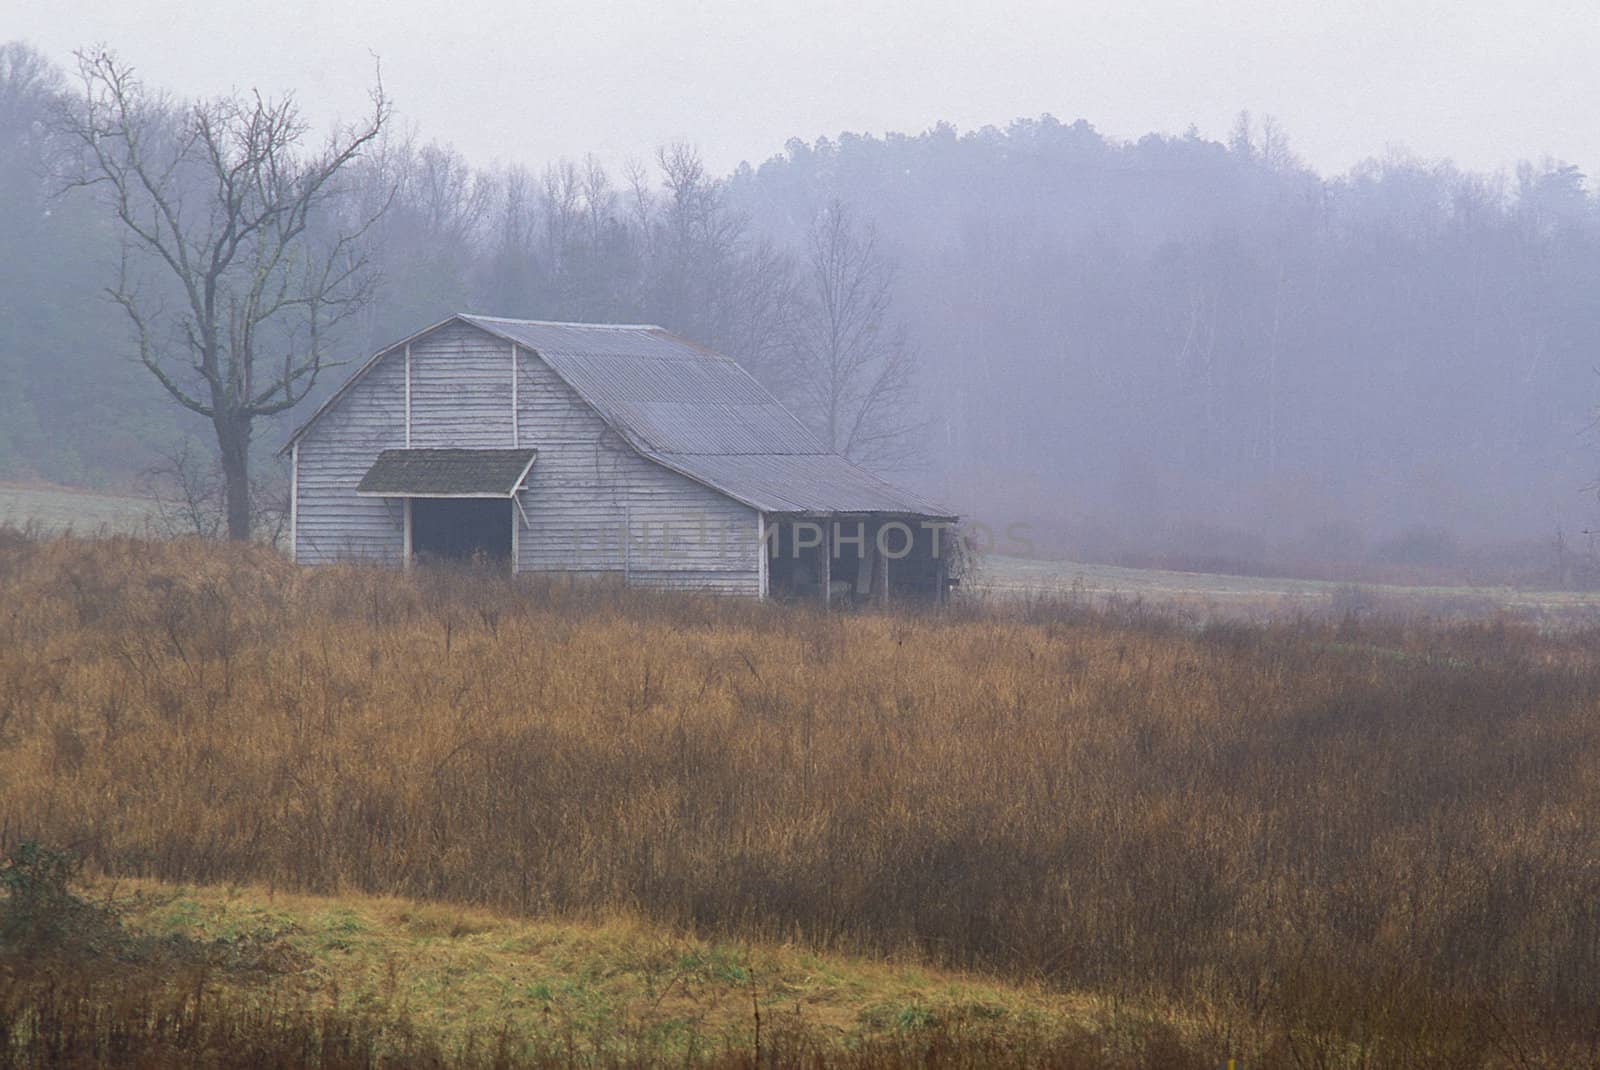 An old barn in a field on a misty day